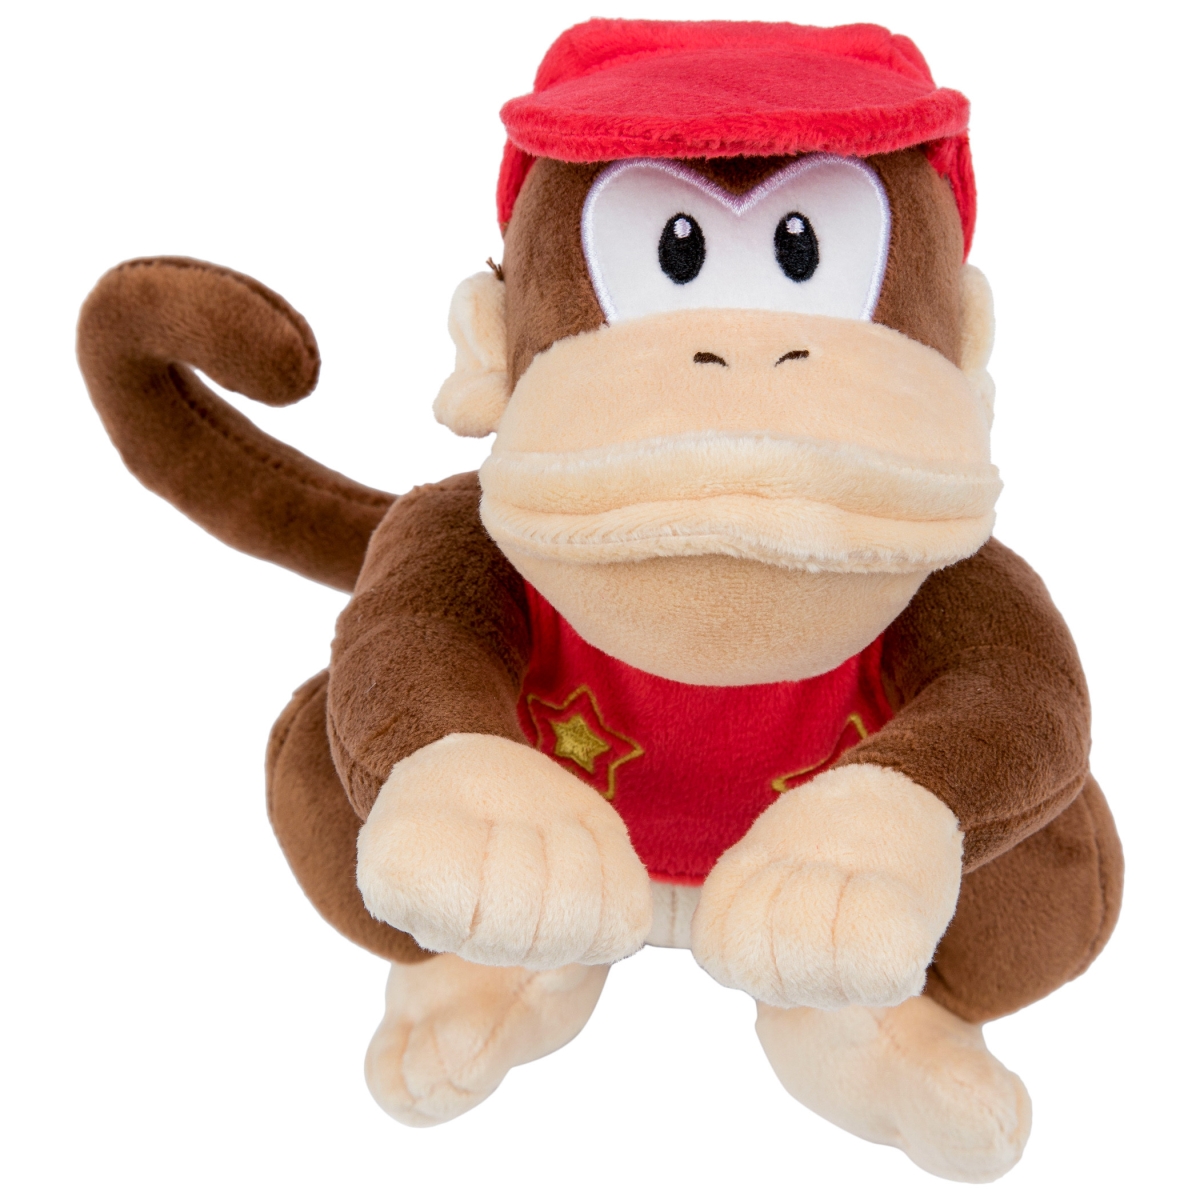 Picture of Donkey Kong 863712 7 in. Donkey Kong Diddy Kong Plush Toy